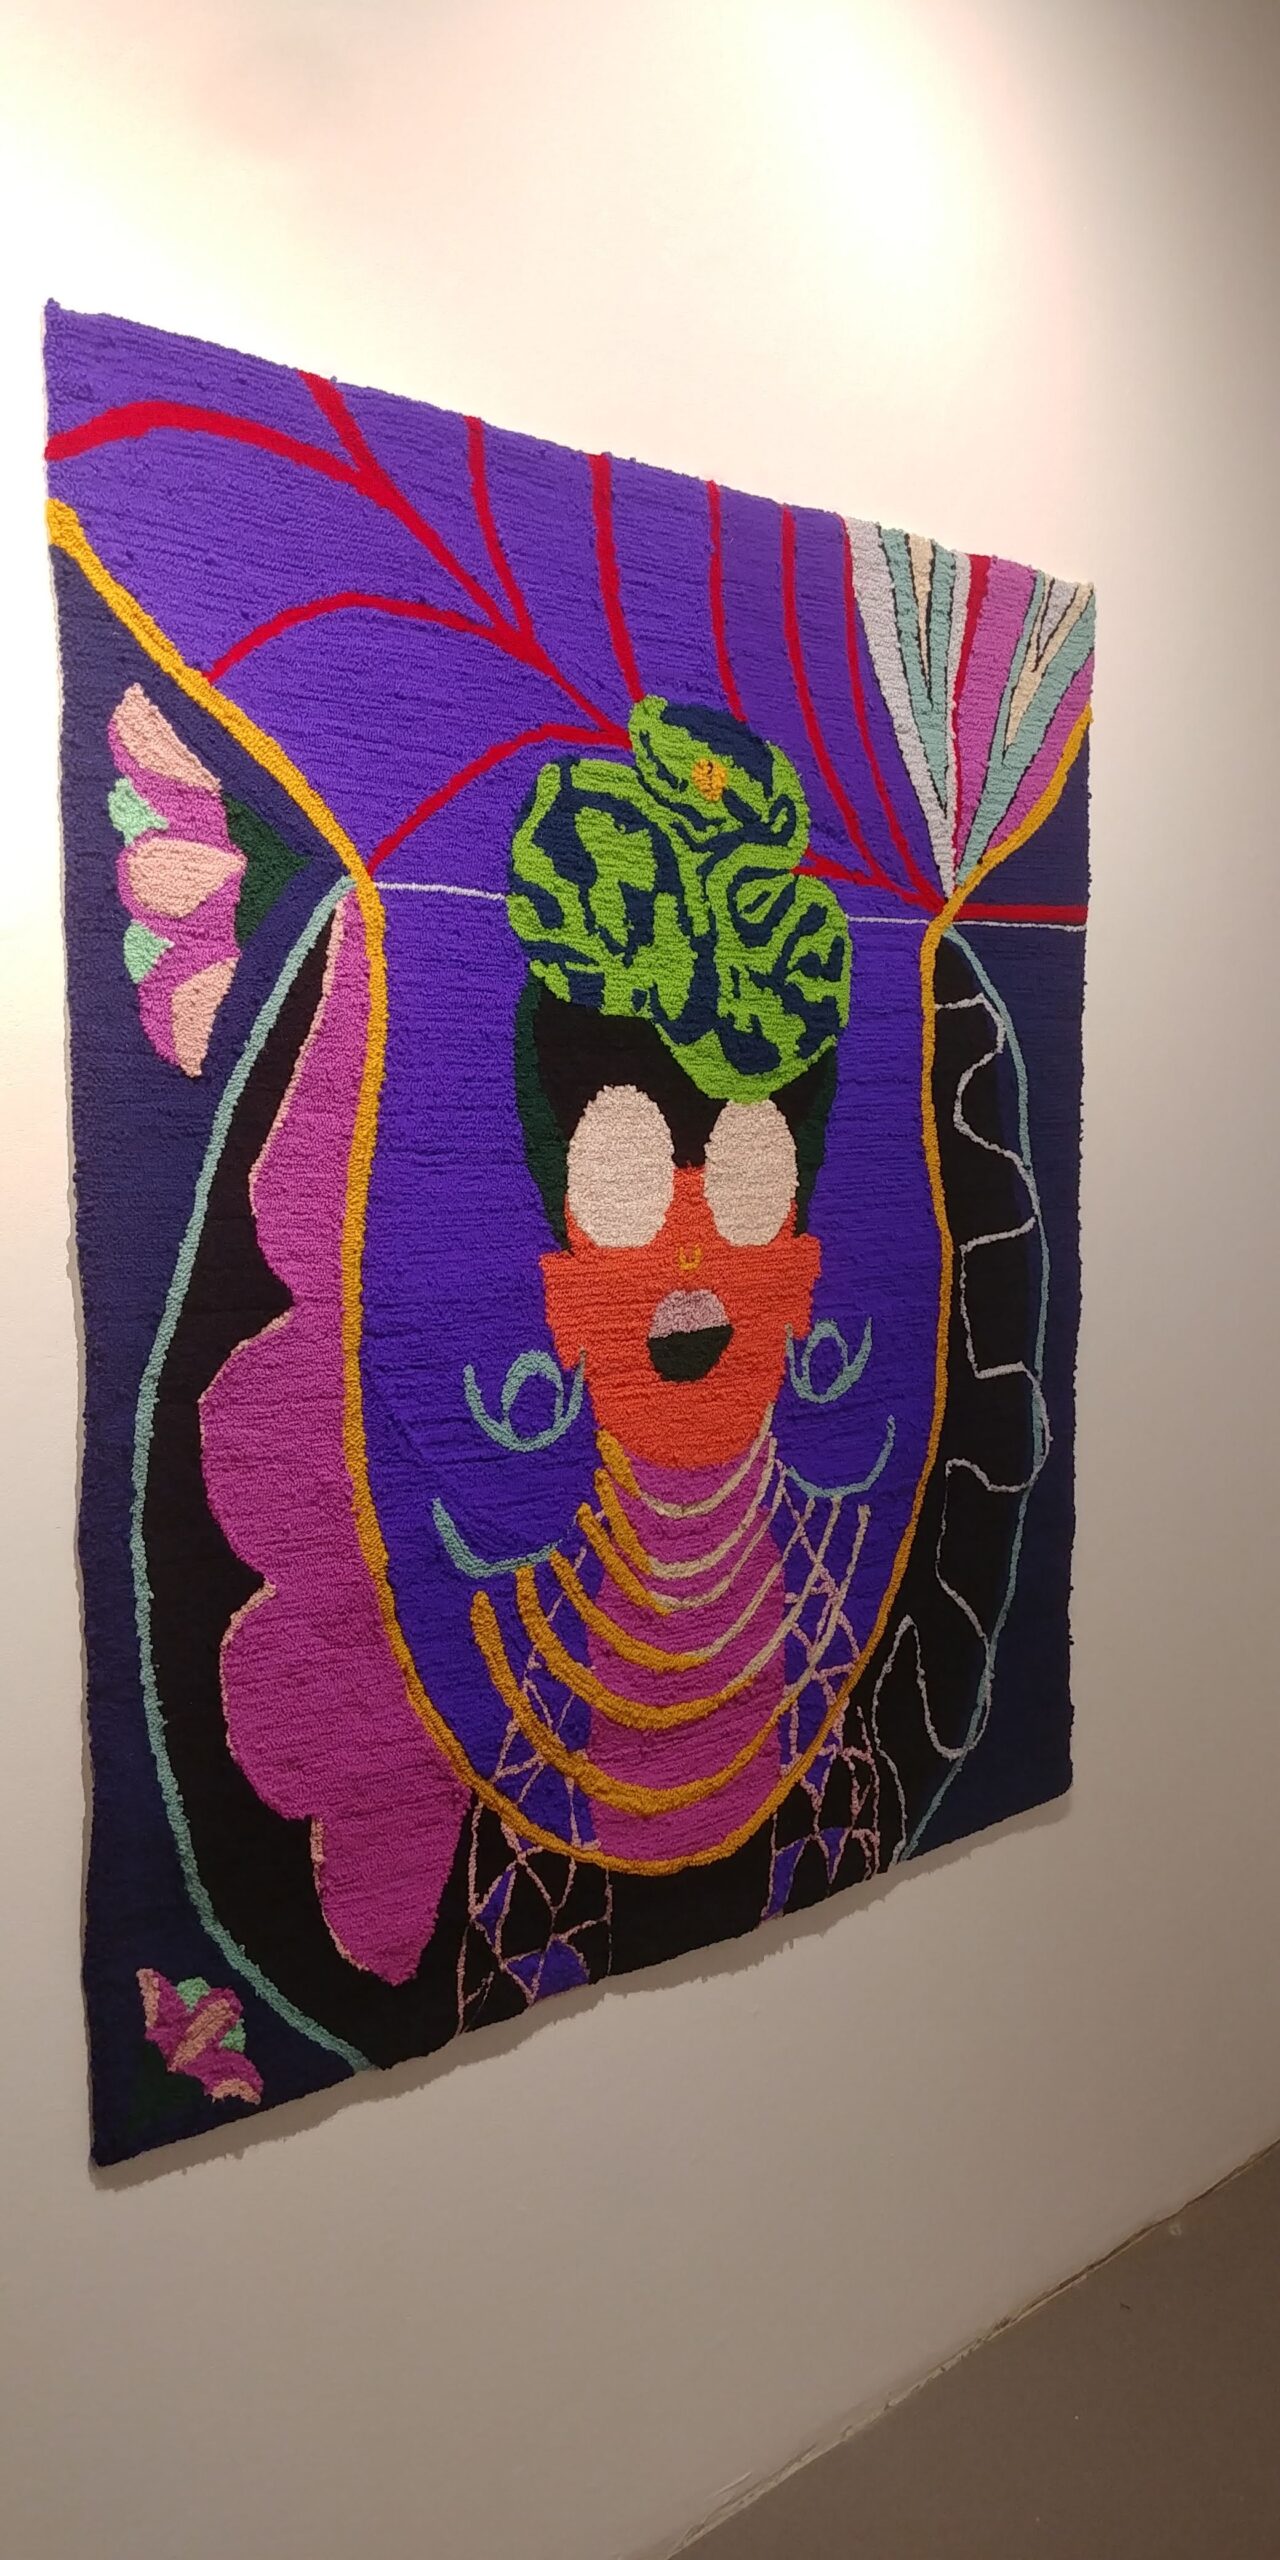 finished wall hanging woman with head scarf and glasses